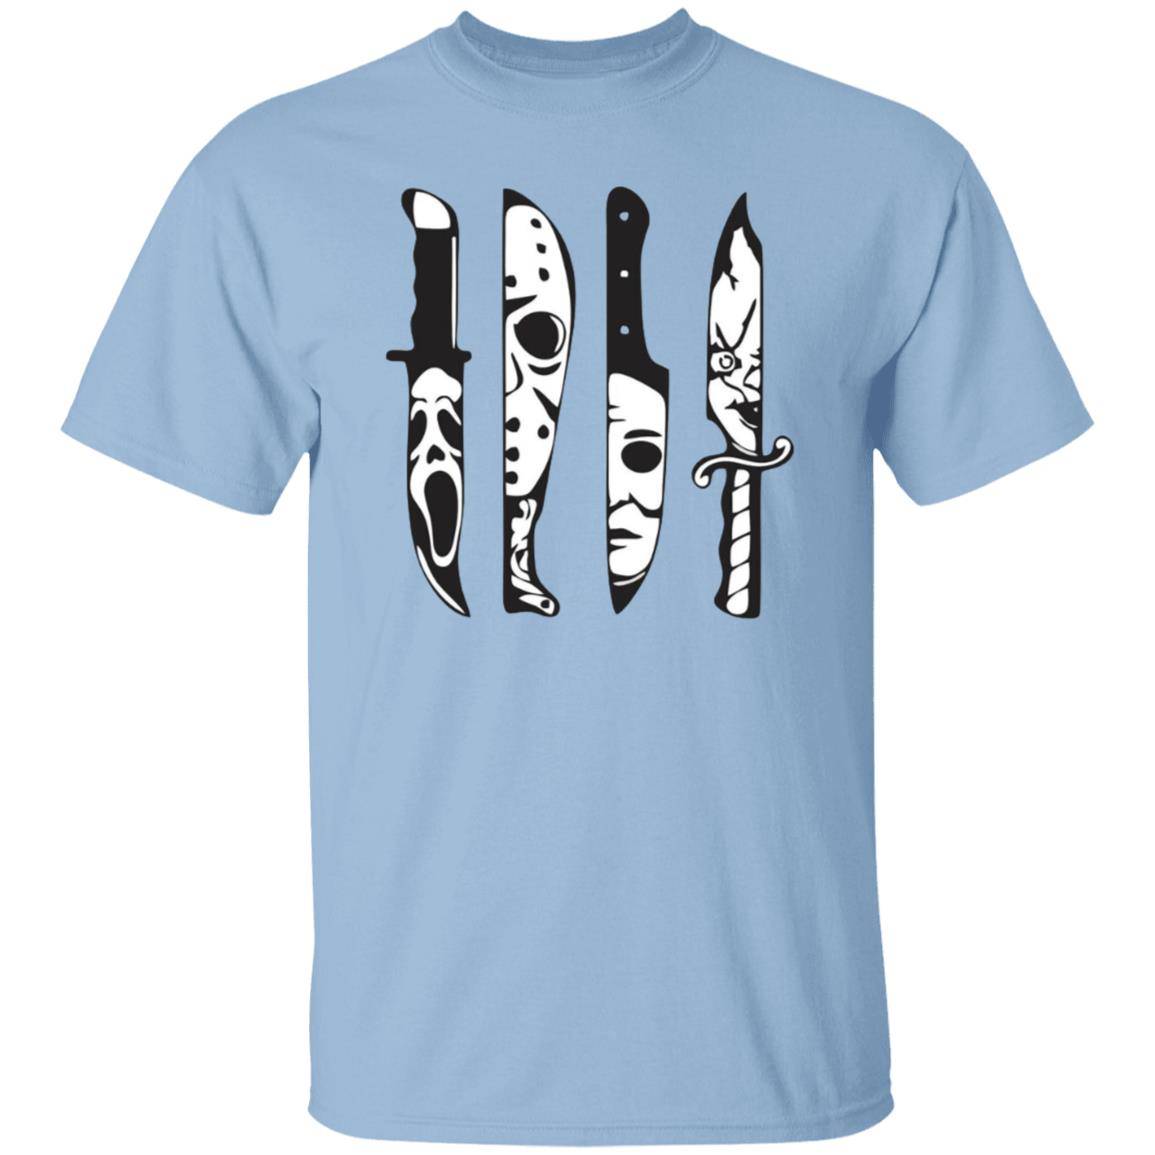 Light blue unisex Halloween t-shirt with four knives across the front. In the reflection of each knife shows the face of a killer from a famous horror movie (Ghostface,  Jason Voorhees, Michael Myers and Chucky).